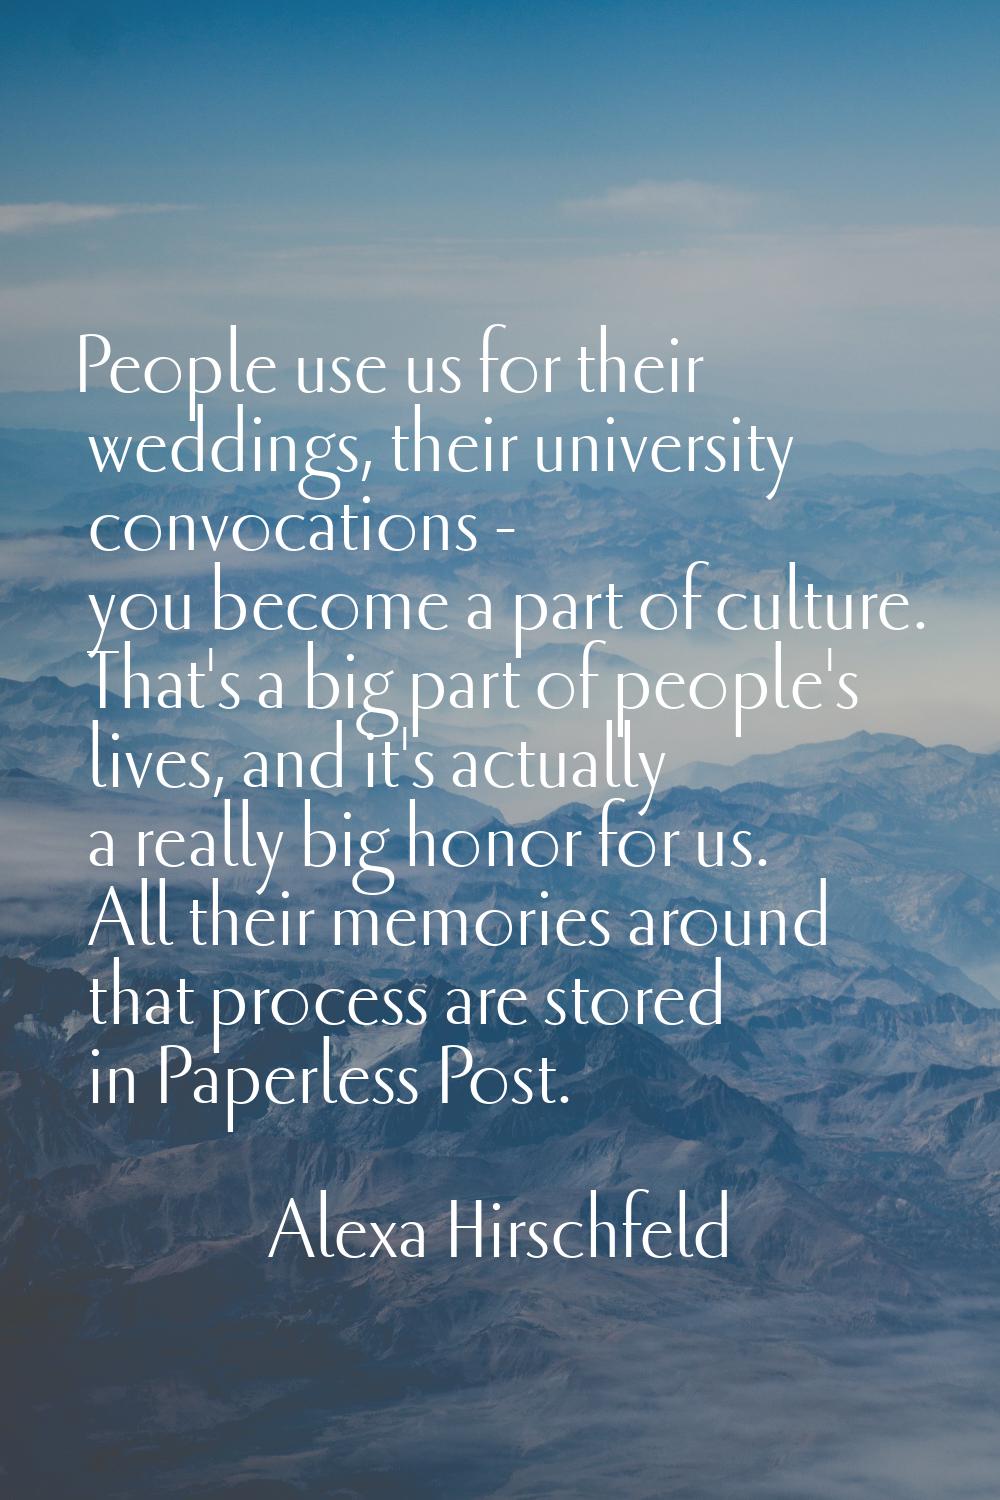 People use us for their weddings, their university convocations - you become a part of culture. Tha